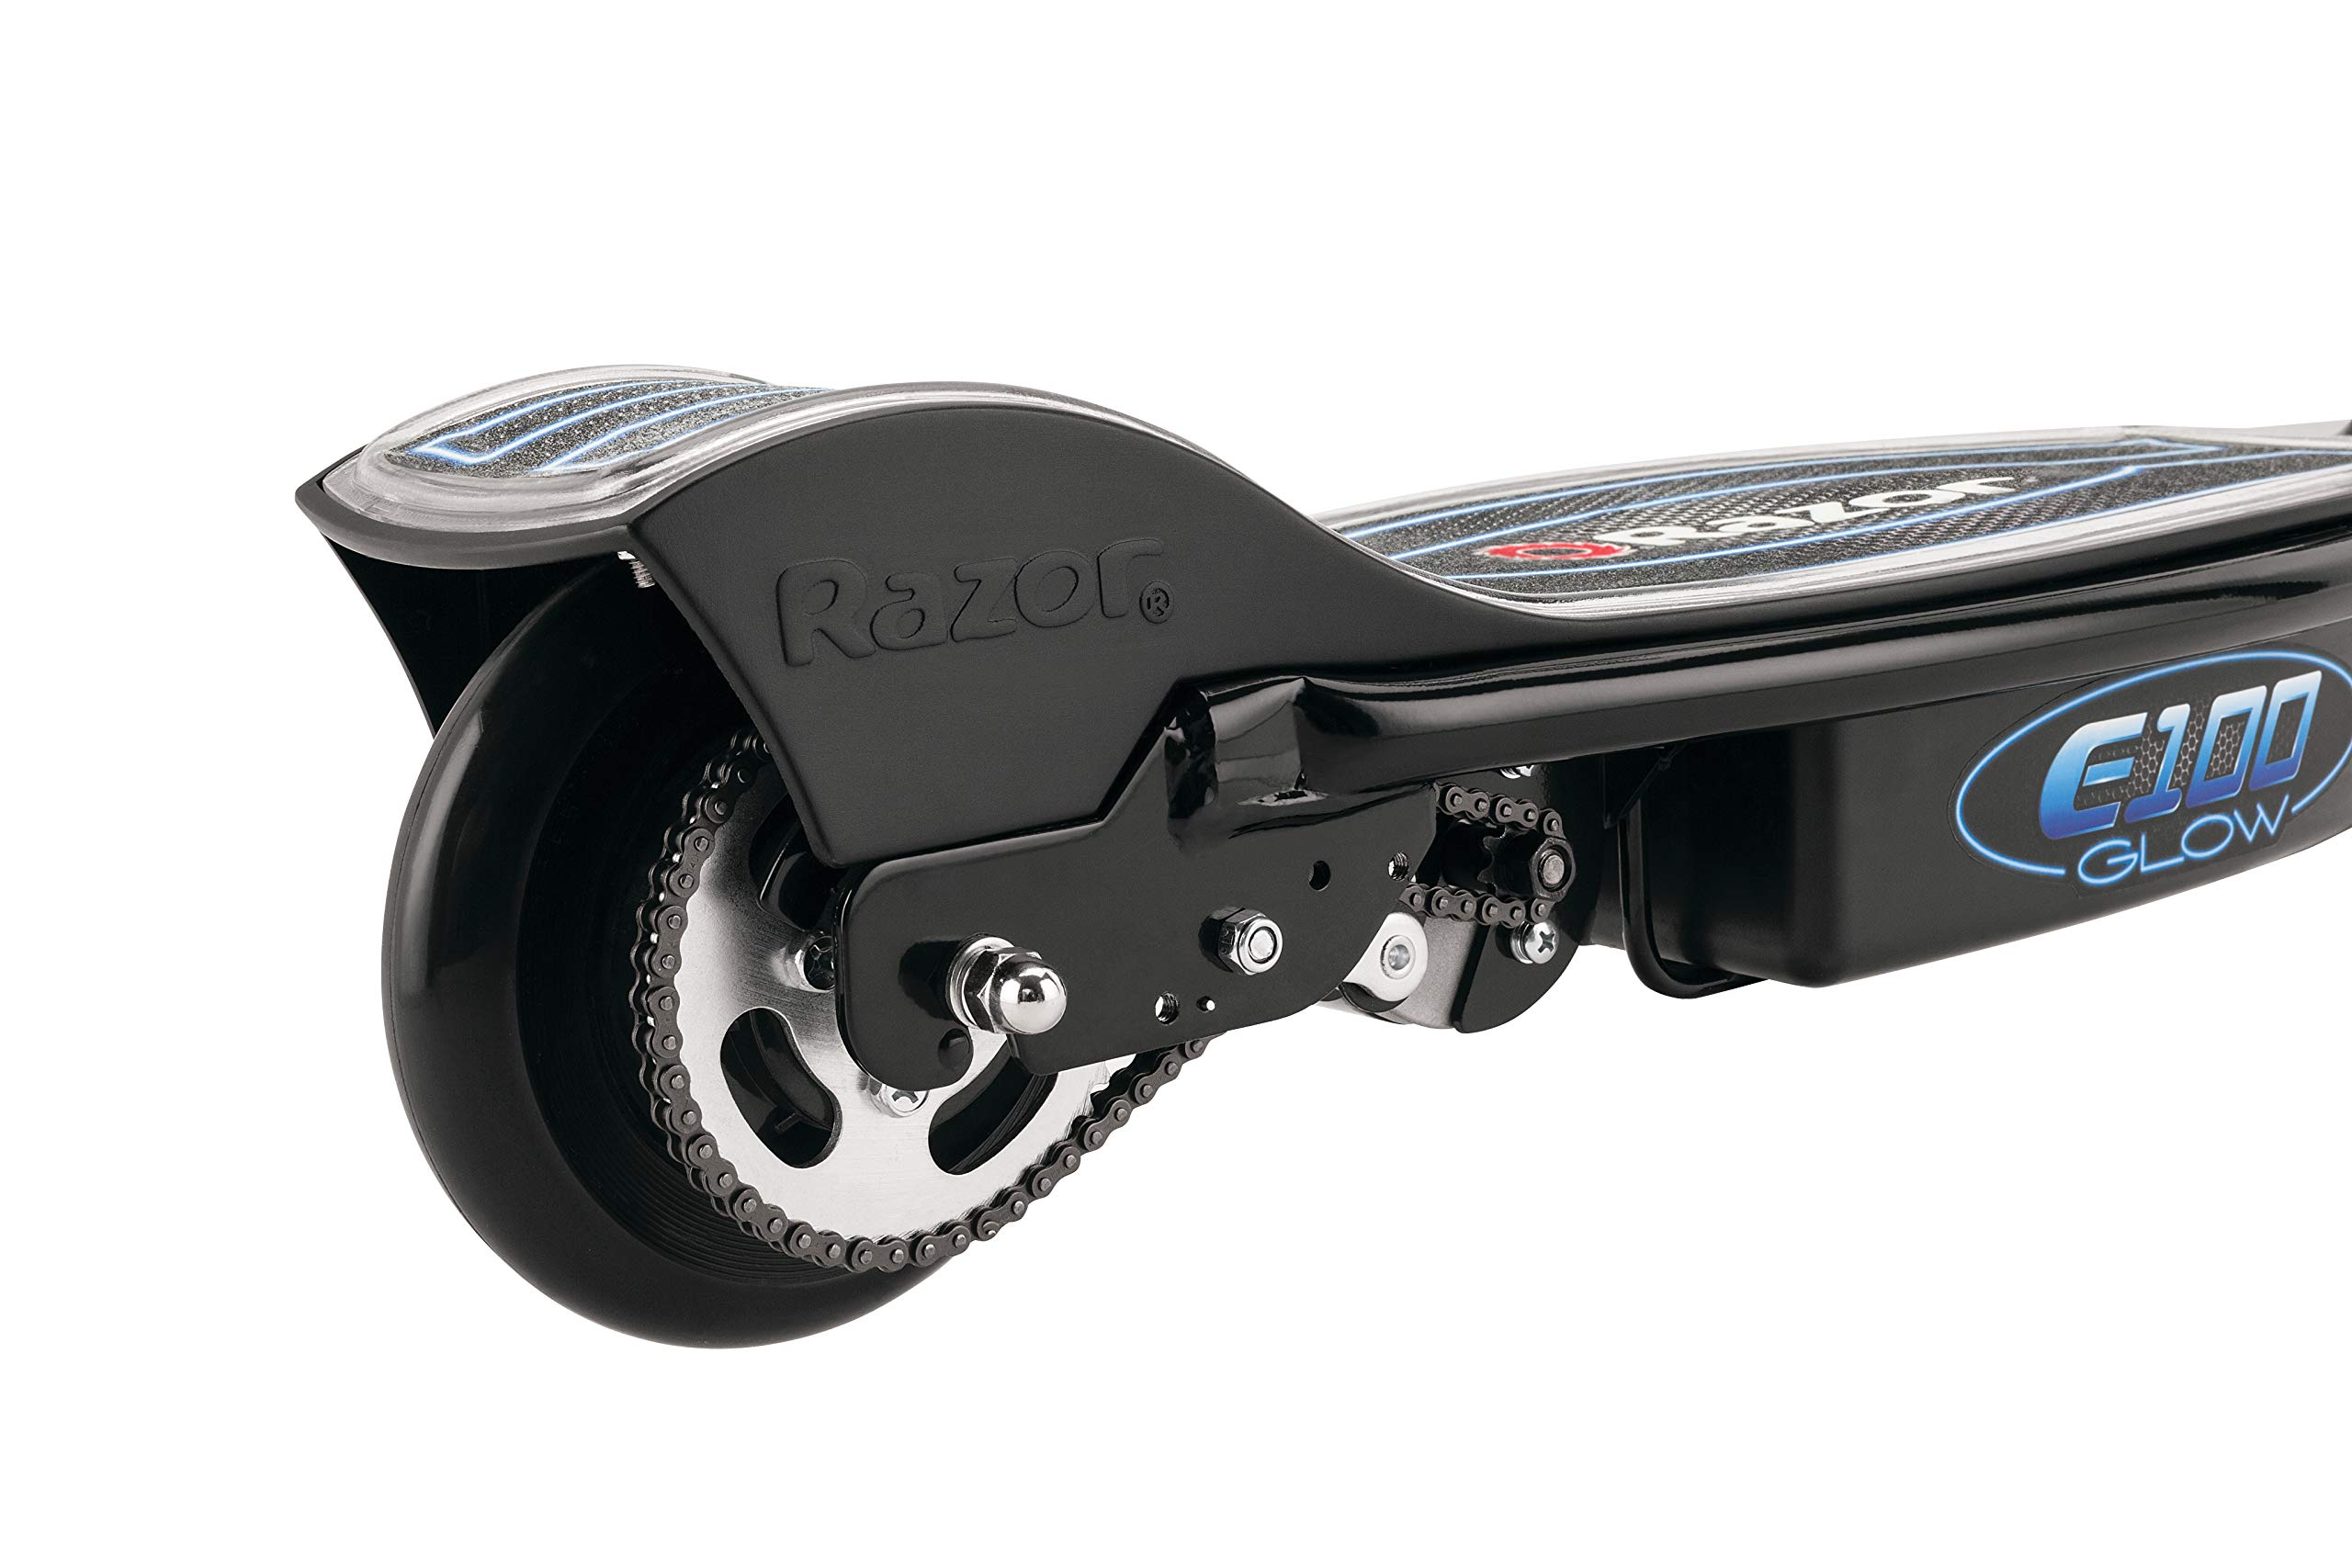 Razor E100 Glow Electric Scooter for Kids Age 8+, LED Light-Up Deck, 8